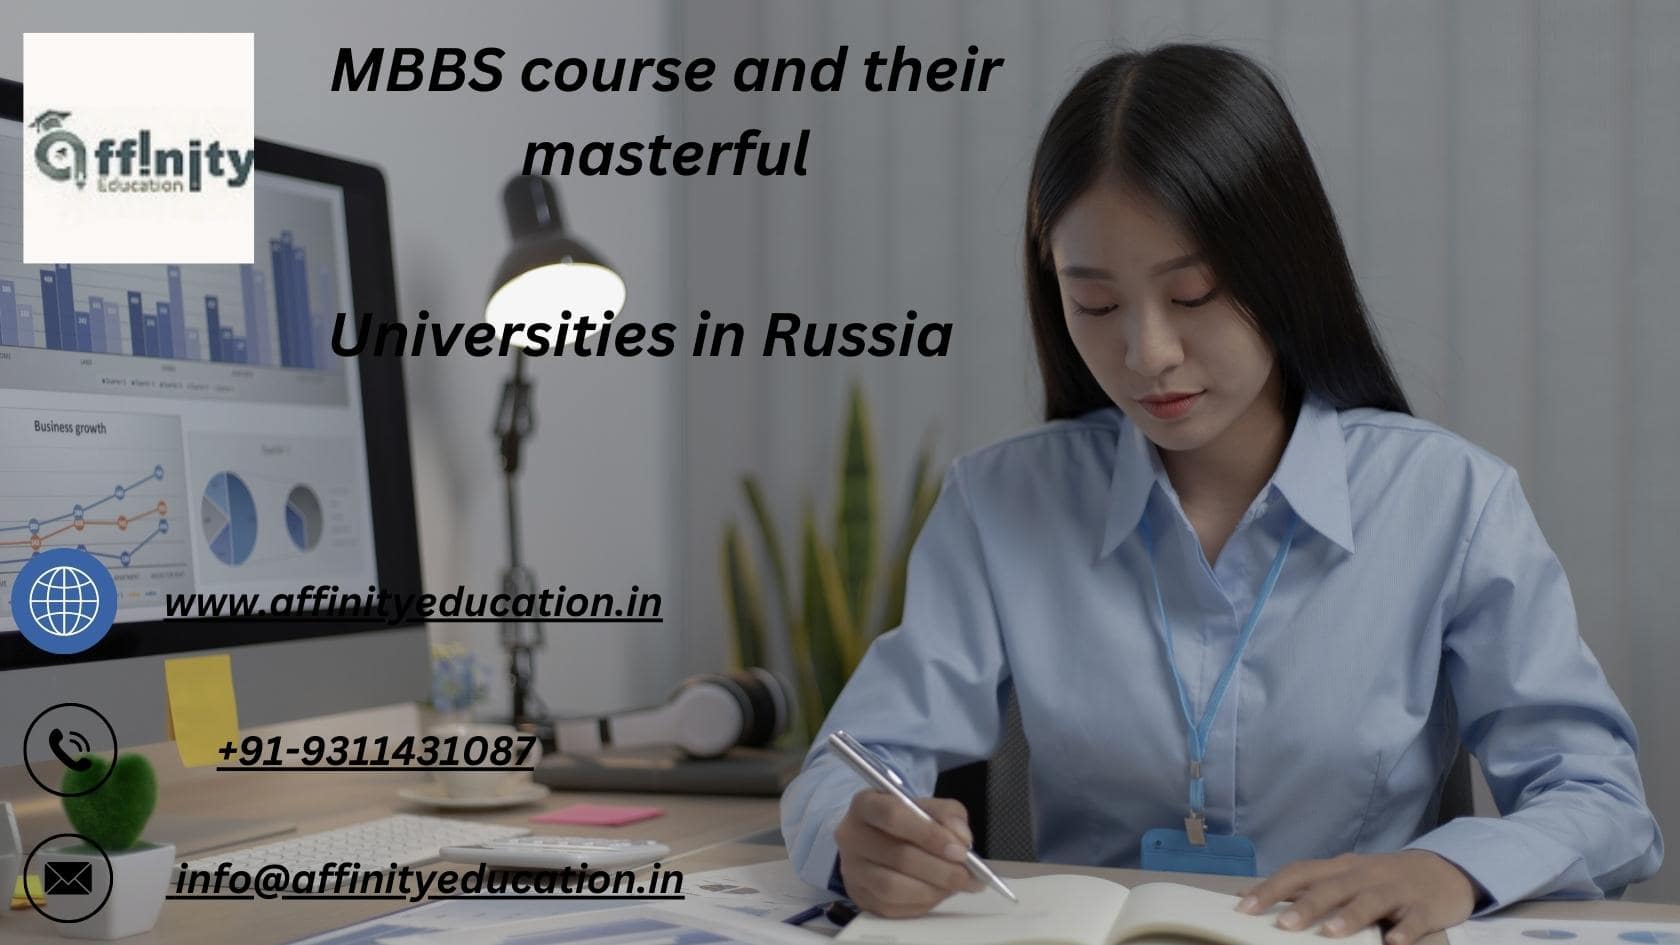 MBBS course and their masterful Universities in Russia